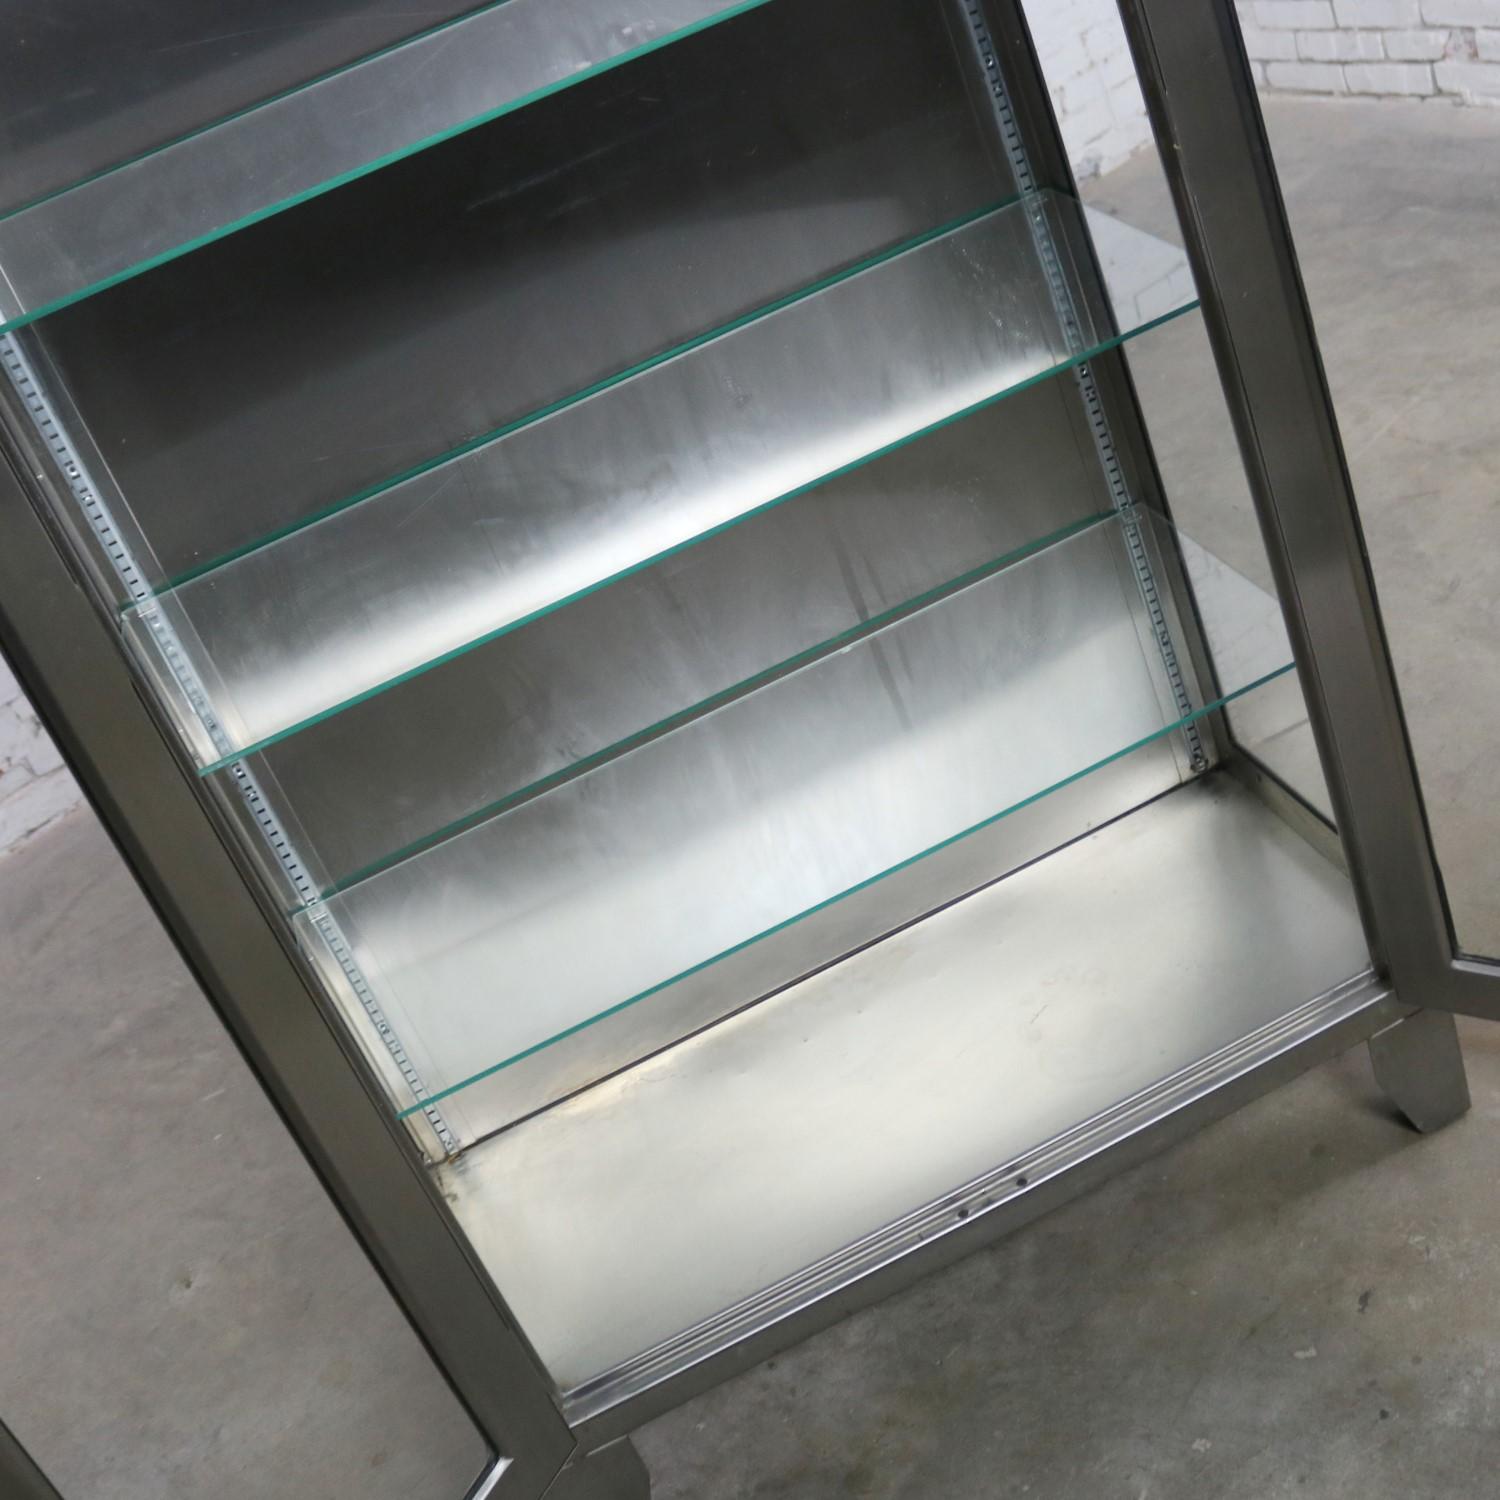 Stainless Steel Industrial Display Apothecary Medical Cabinet with Glass Doors 6 2